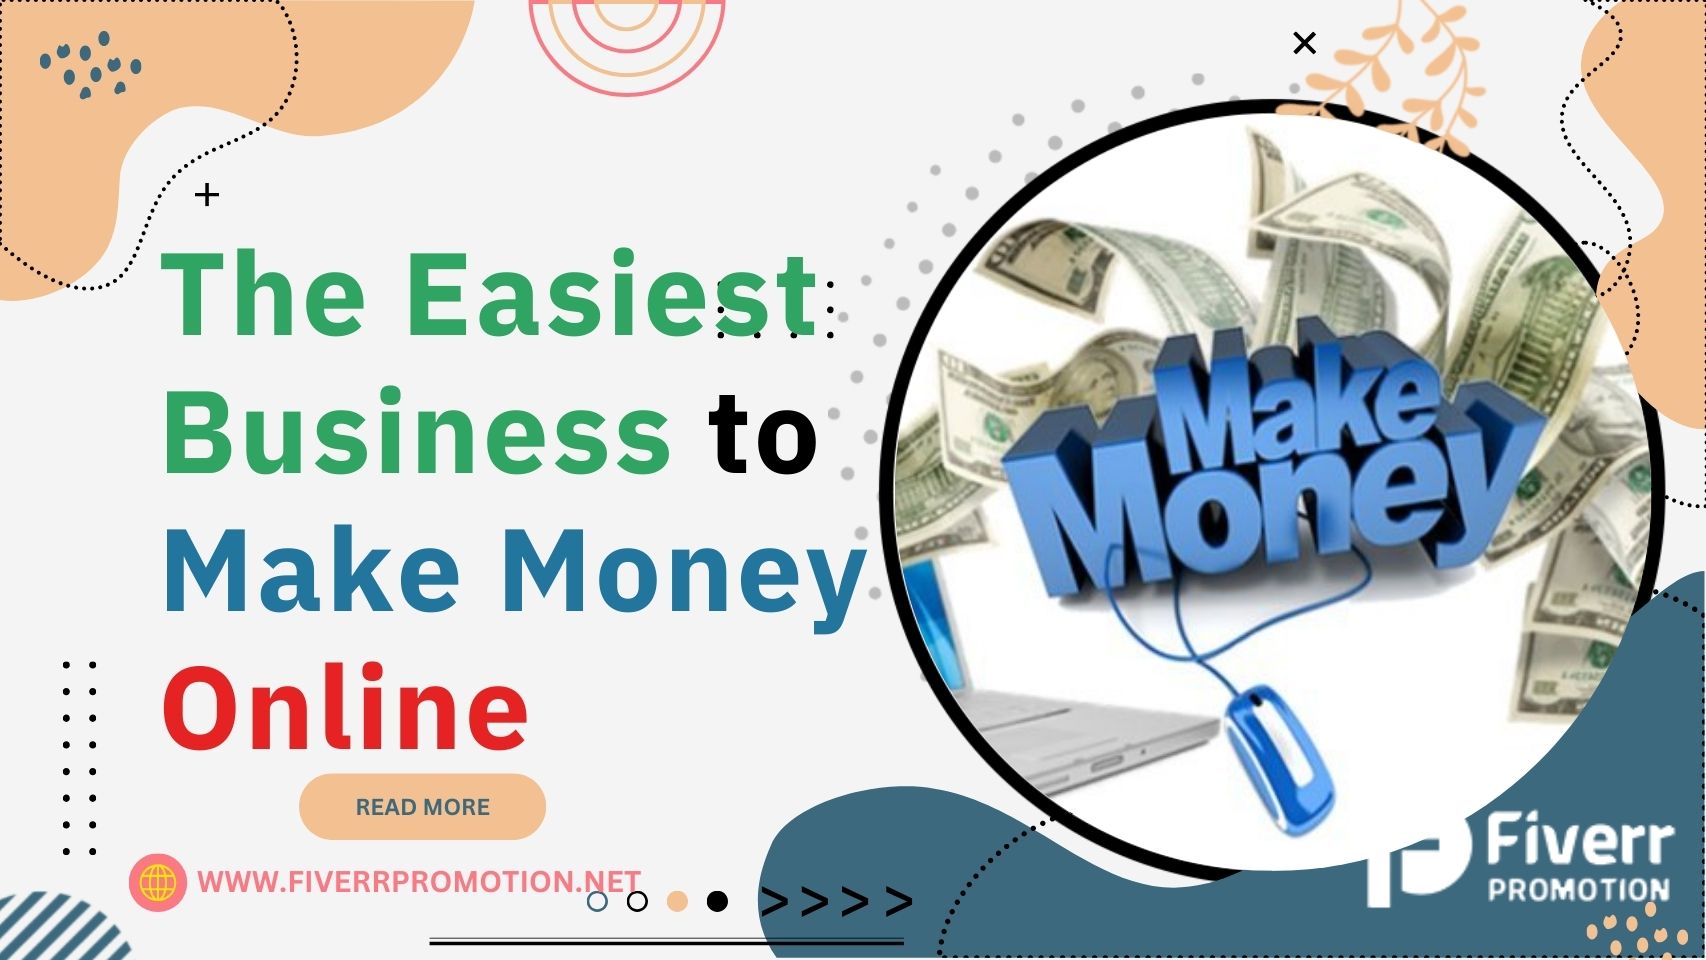 The Easiest Business to Make Money Online